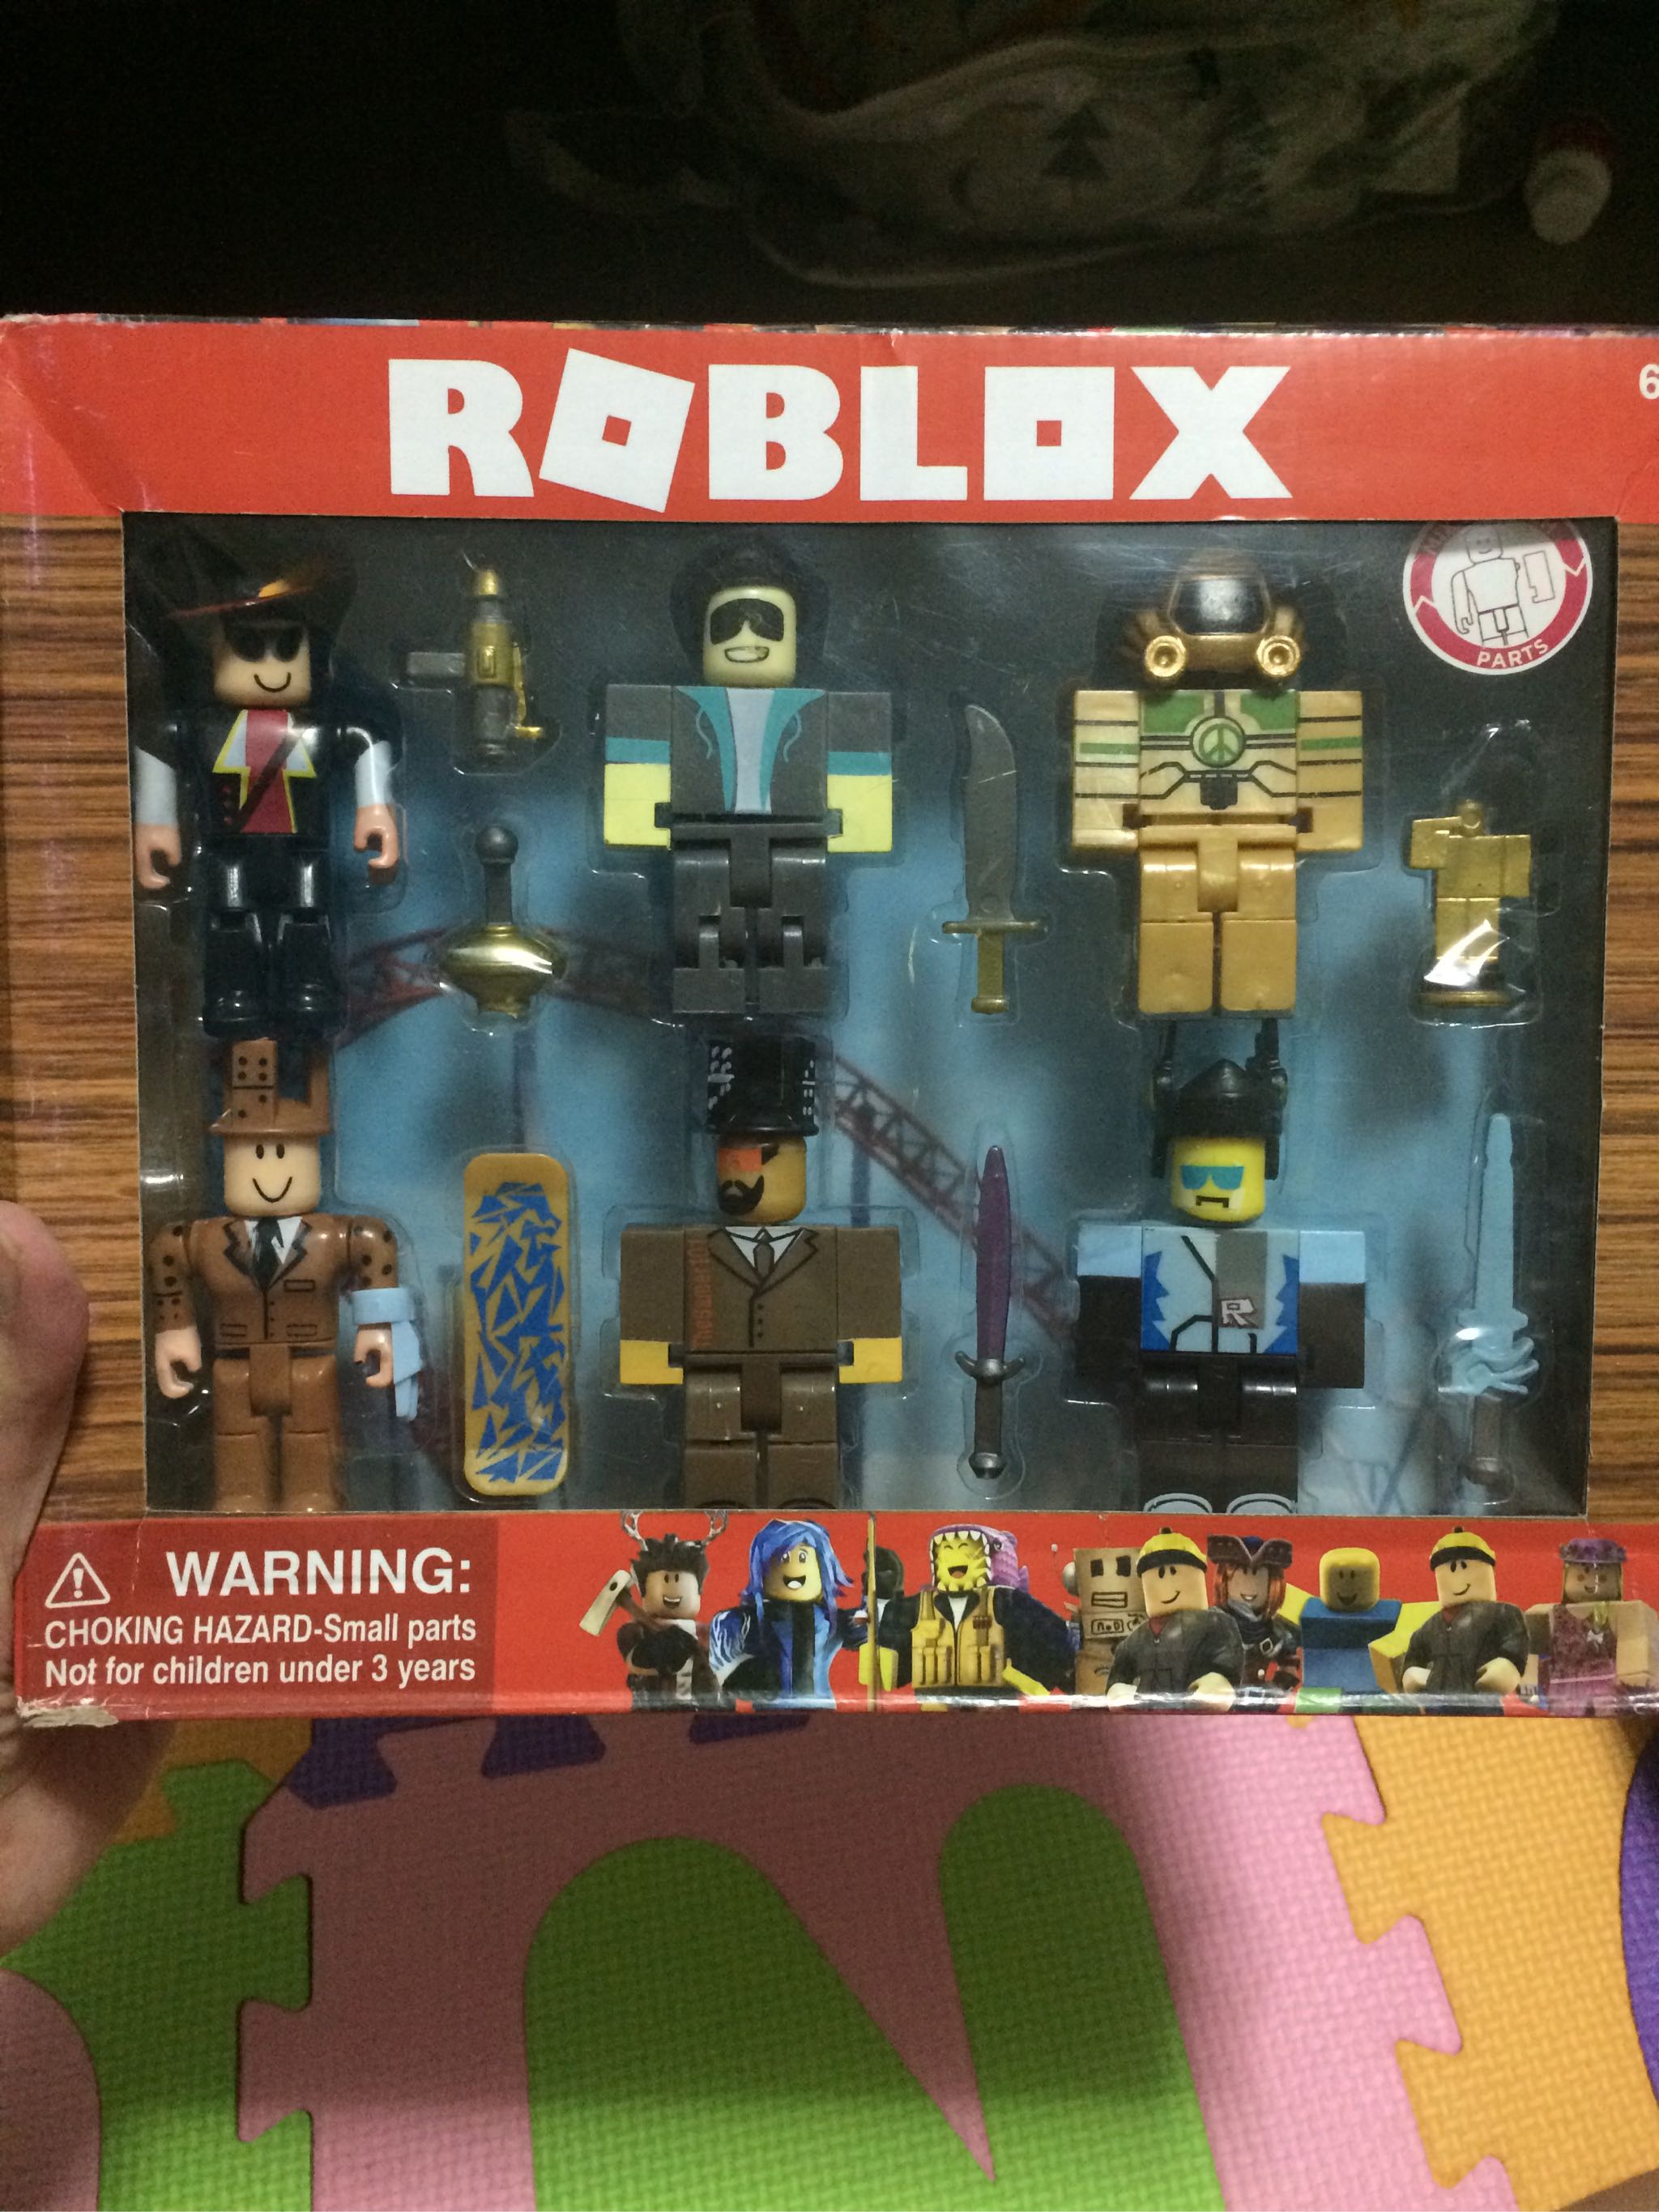 Roblox Legends Of Roblox Collectibles No Code - details about legends of roblox 6 pack of figures merely seranok loleris series 2 mini